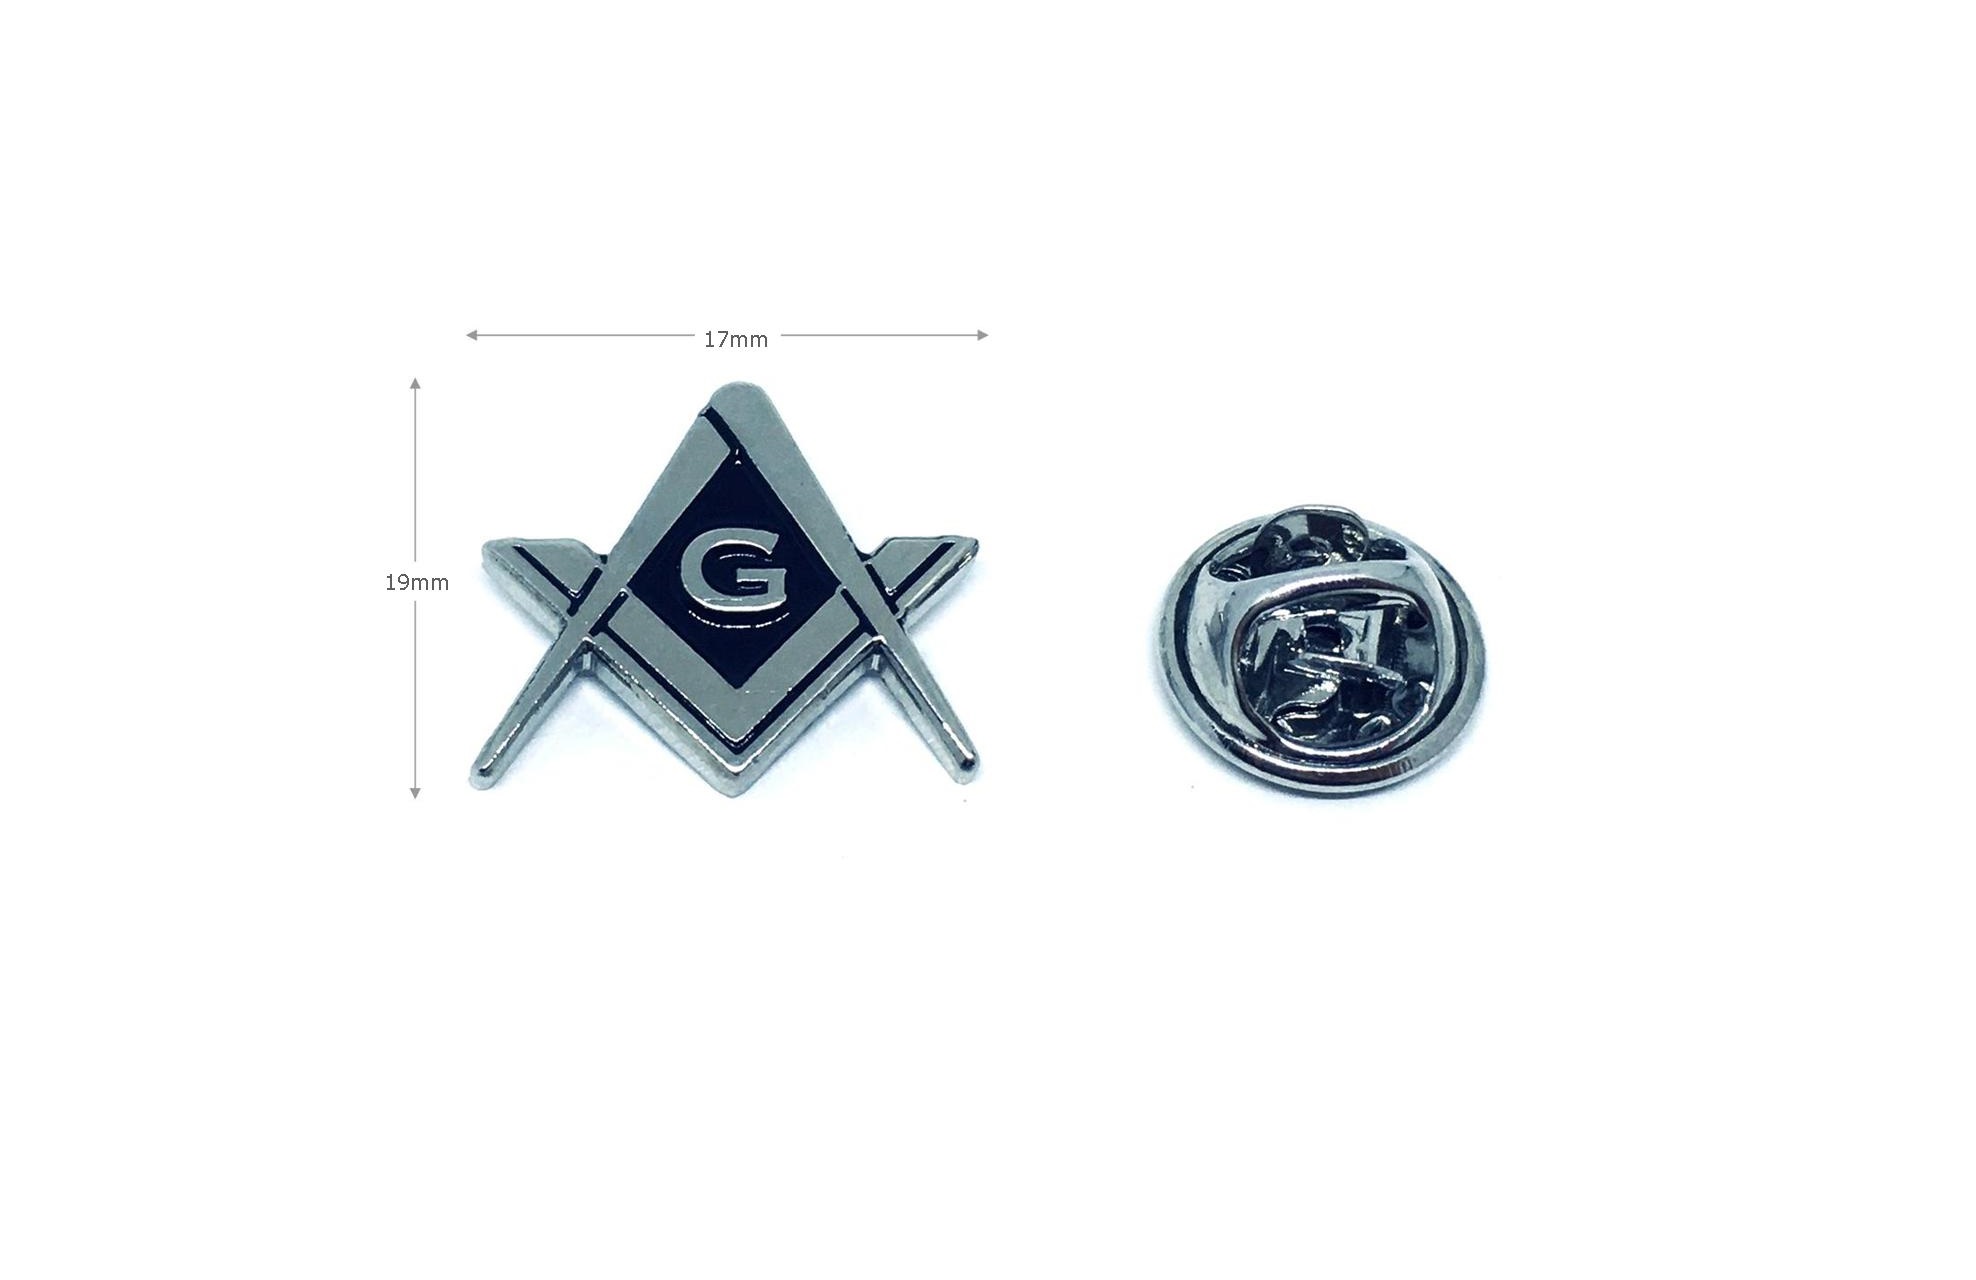 Square And Compass Pin